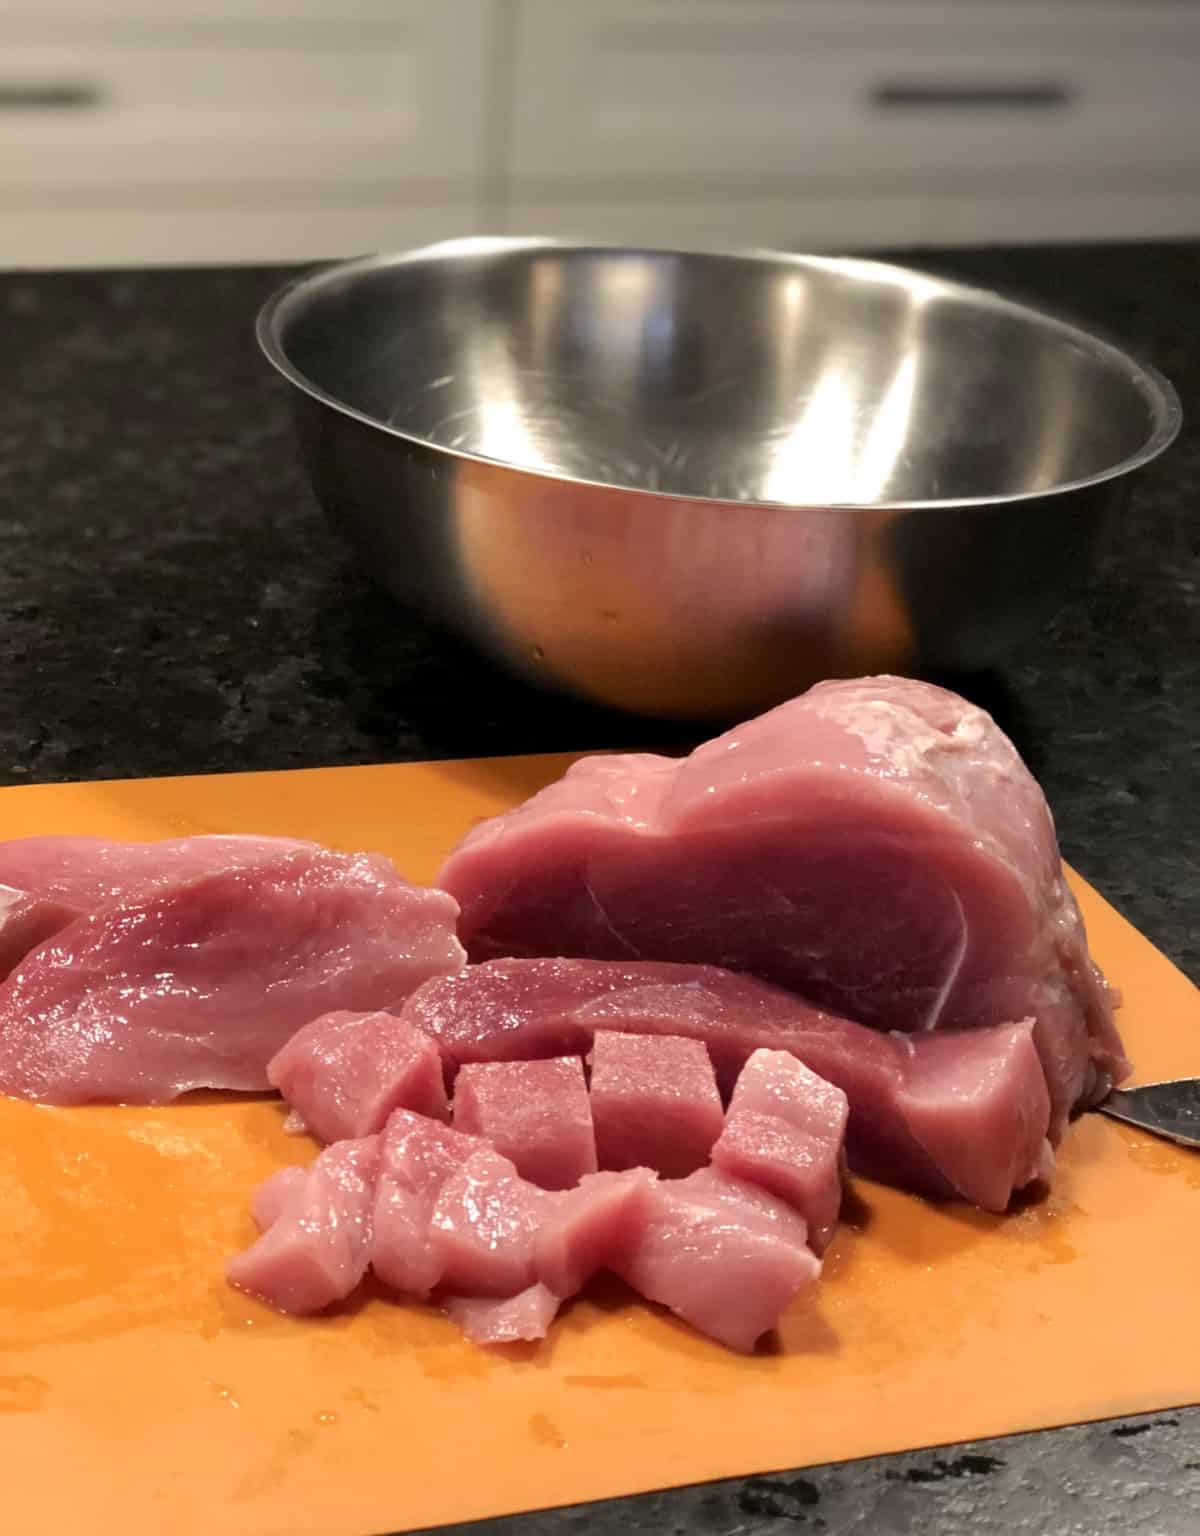 Cutting raw pork roast into cubes on orange cutting mat with stainless bowl in background